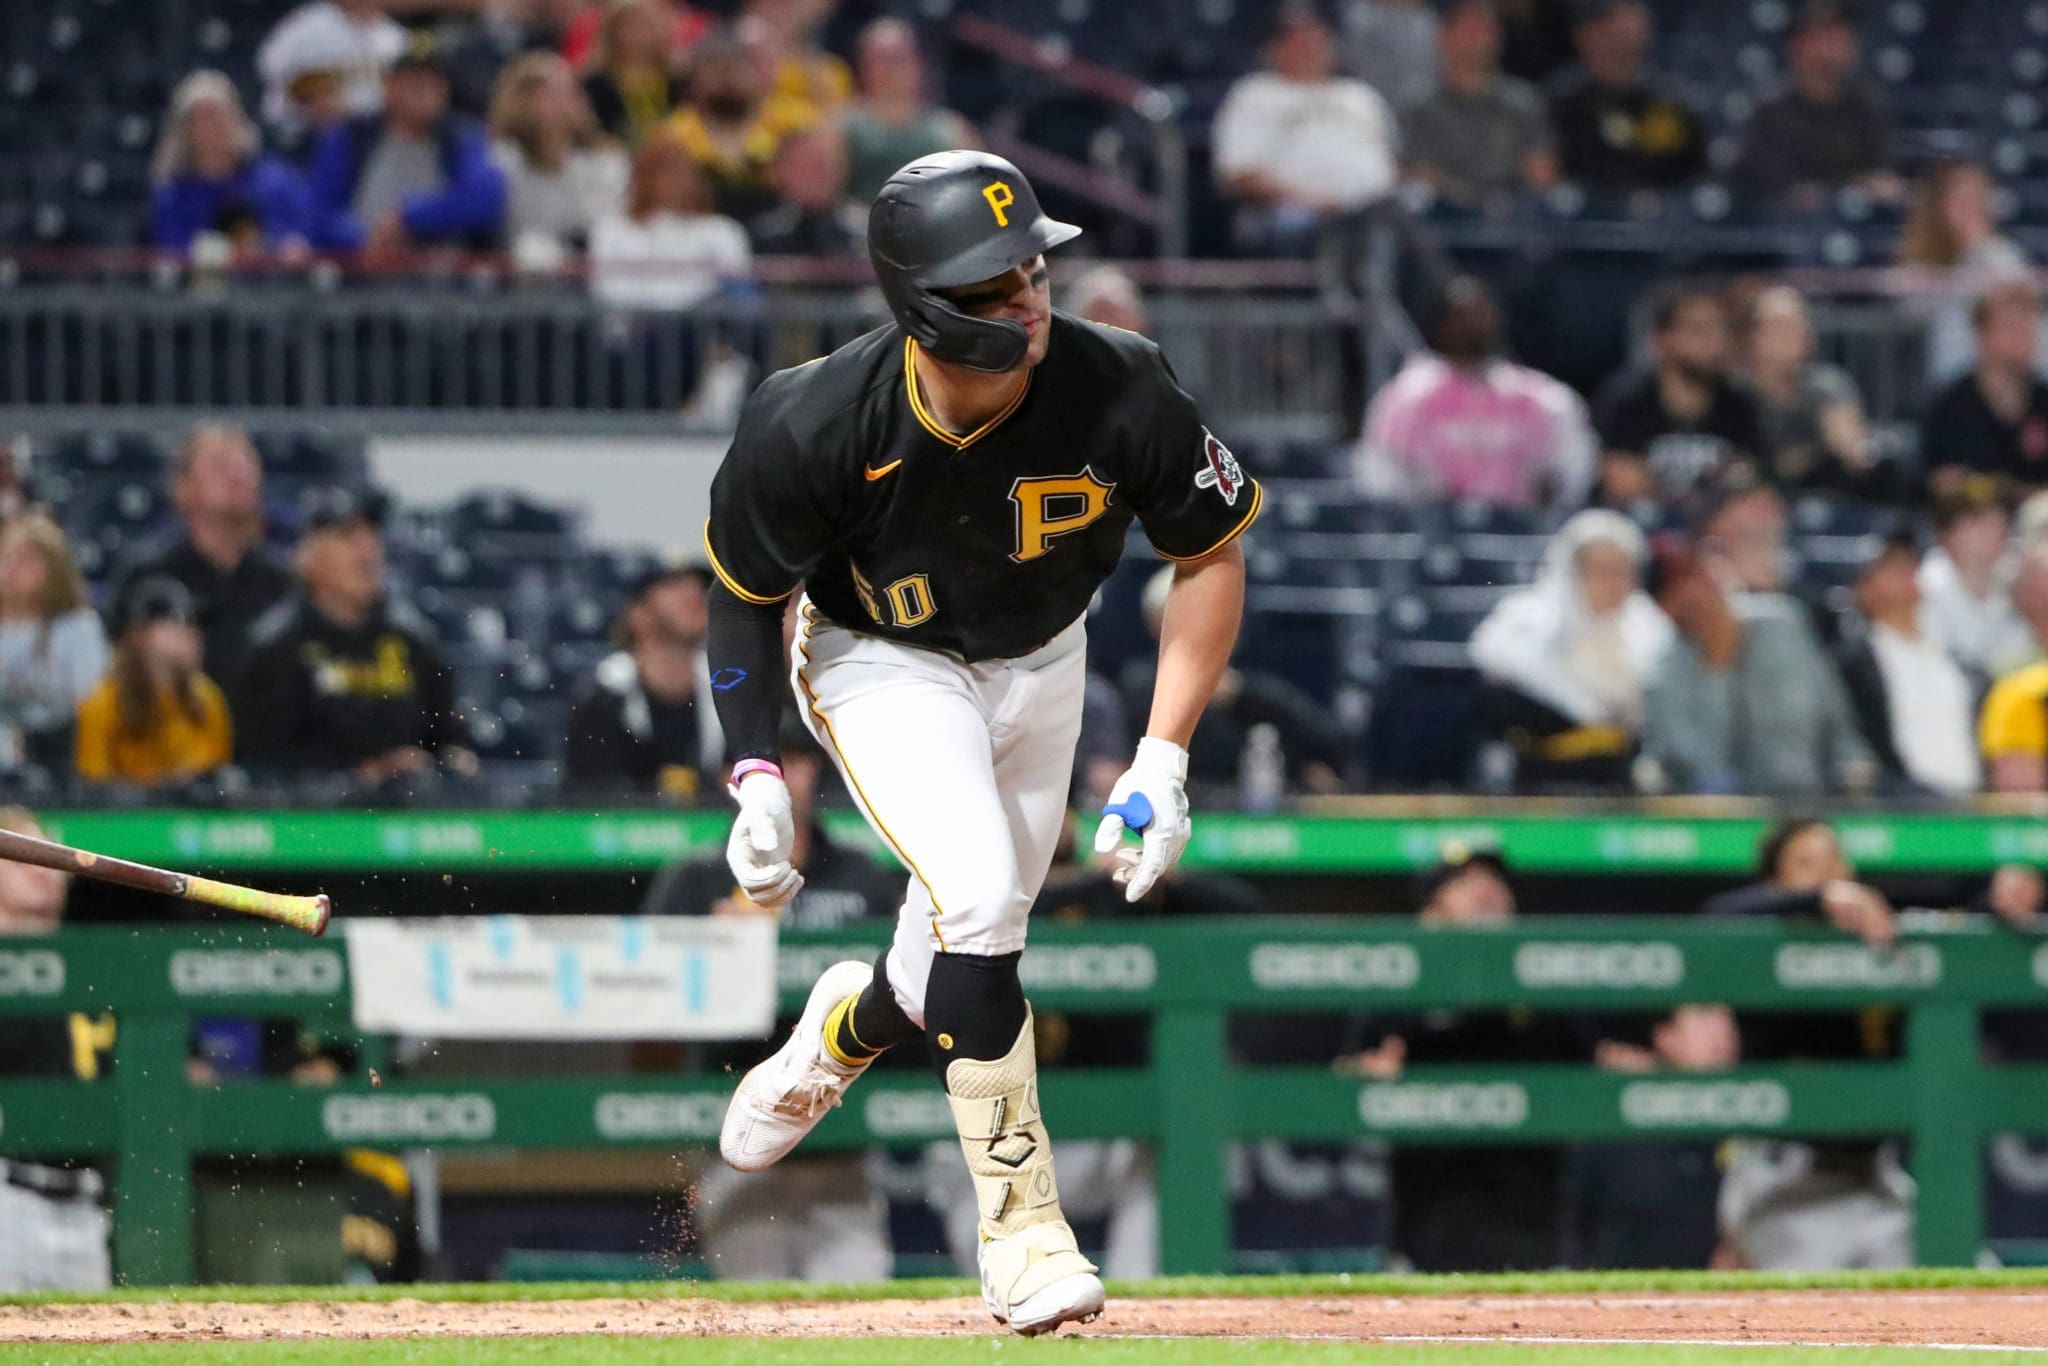 Pirates prospects, travis swaggerty